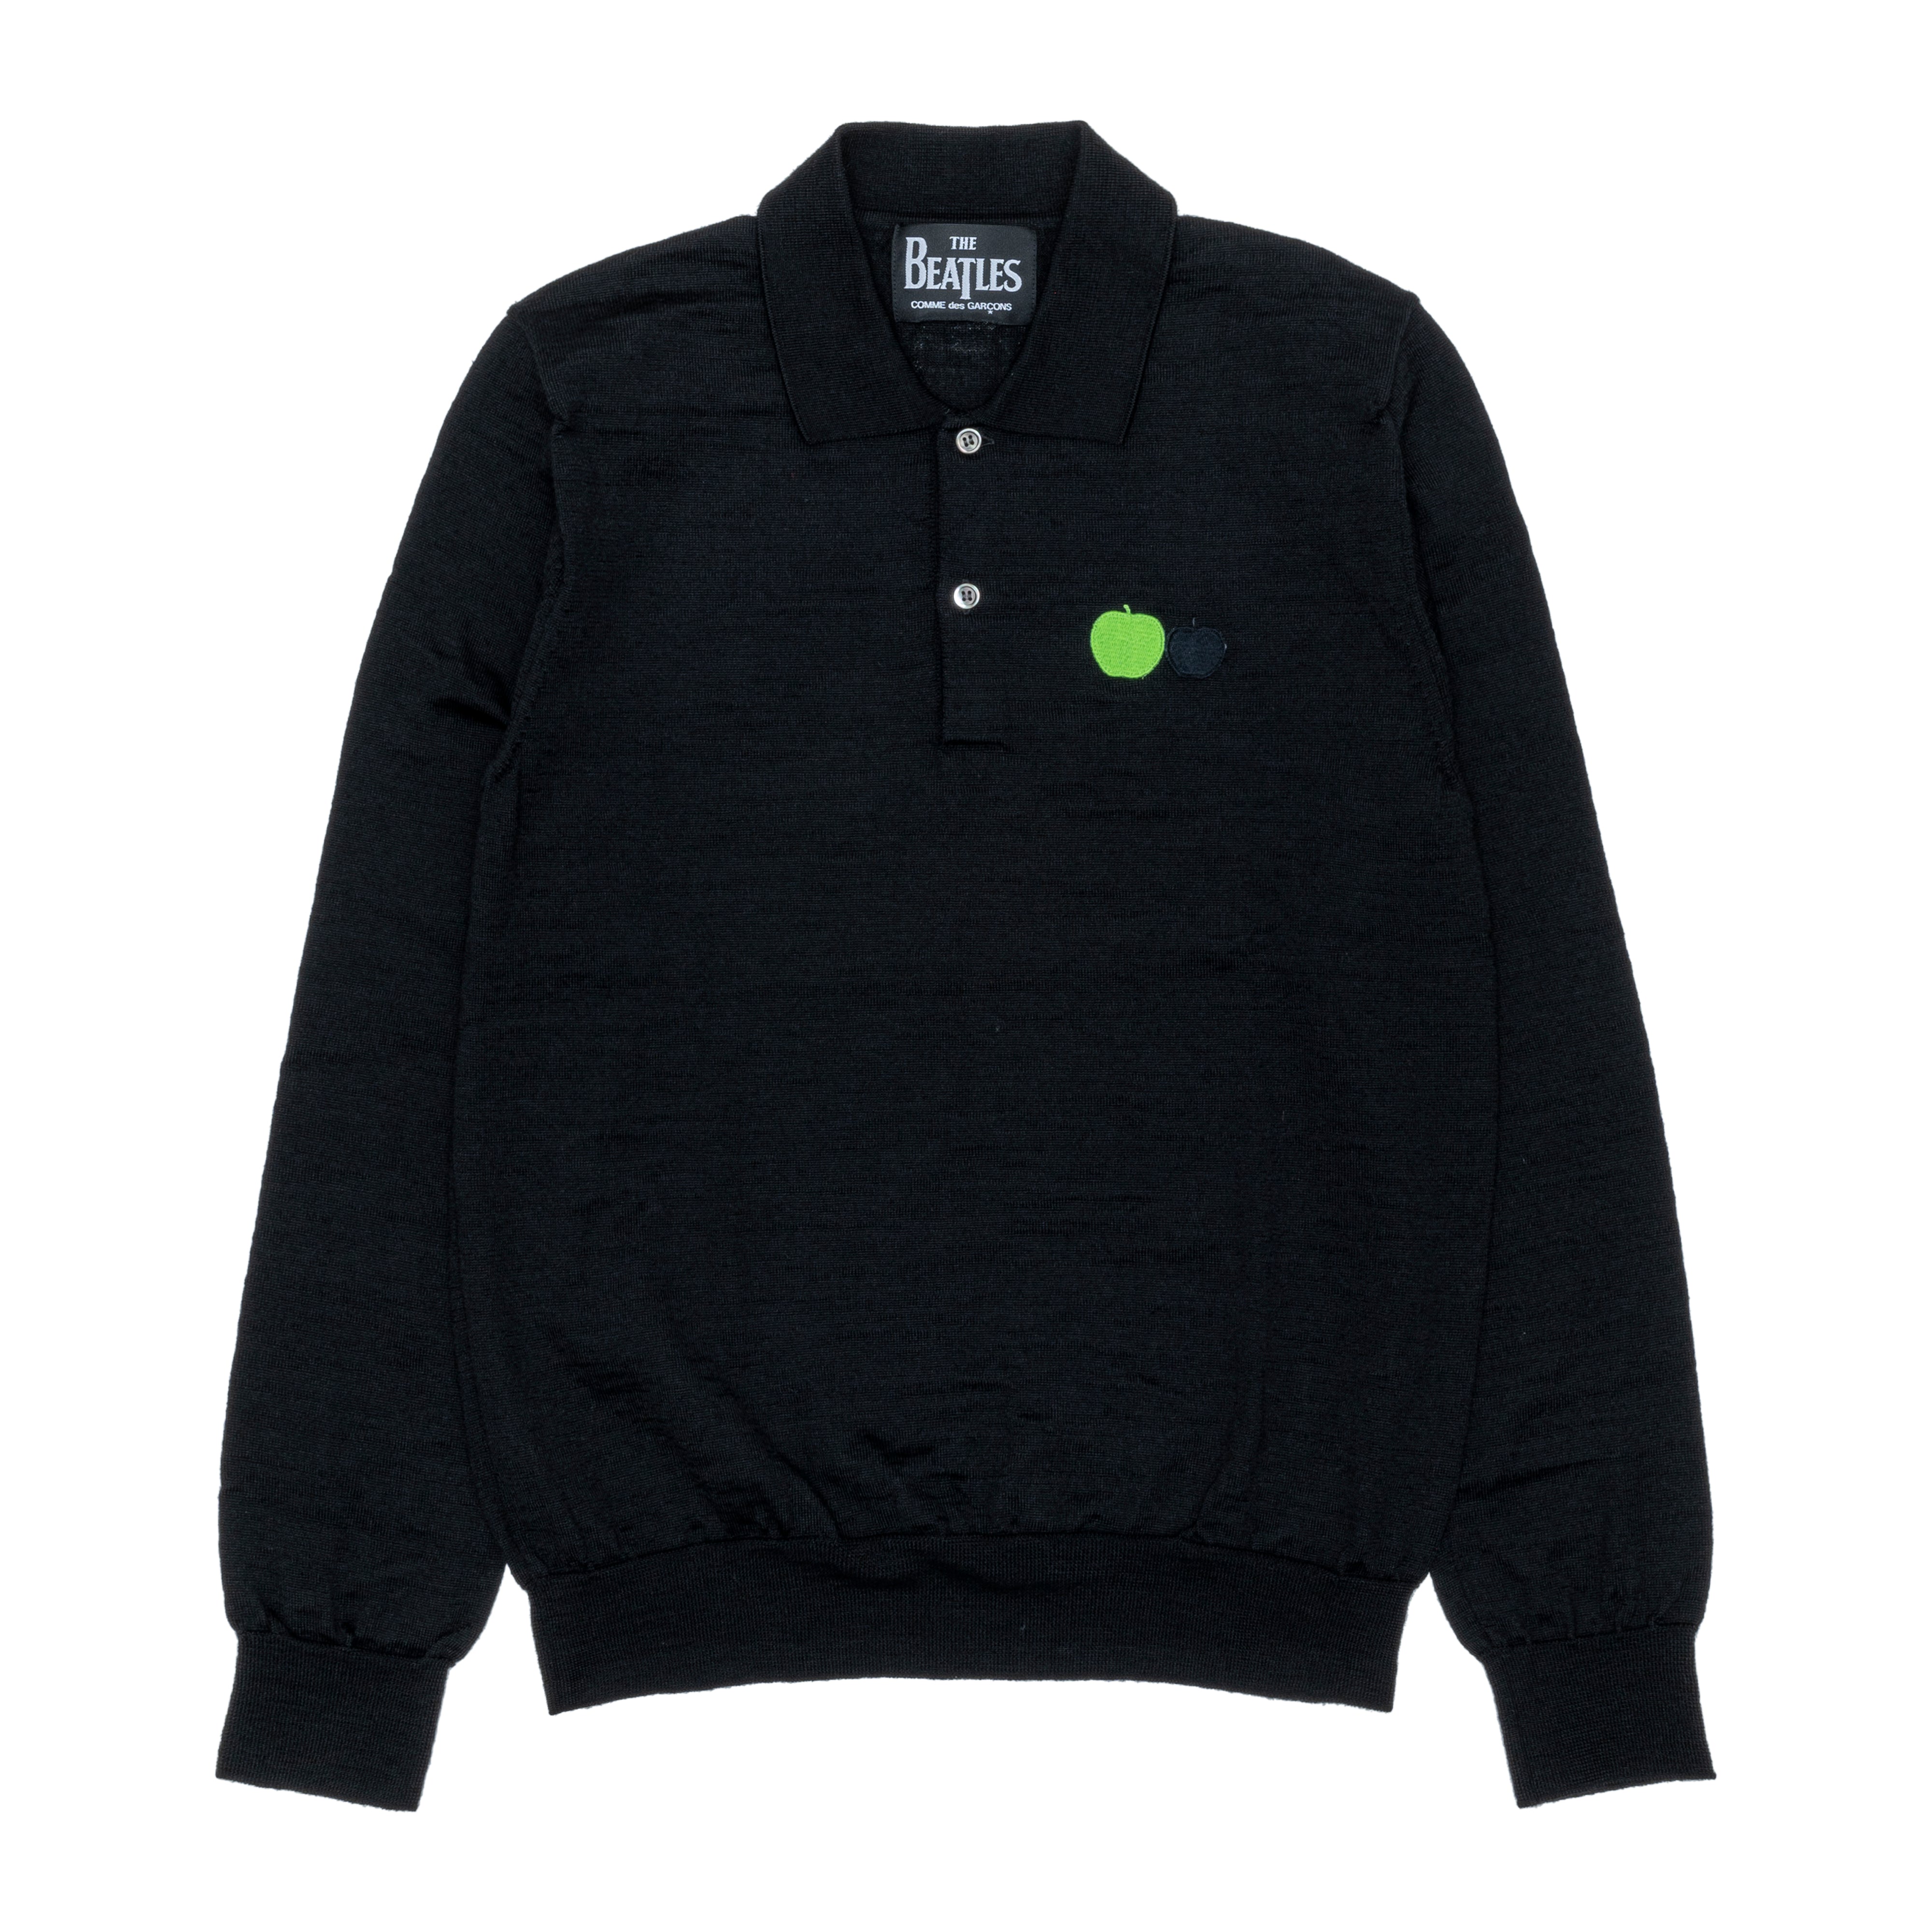 THE BEATLES CDG - One Point Knit Polo - (Black) – DSMG E-SHOP